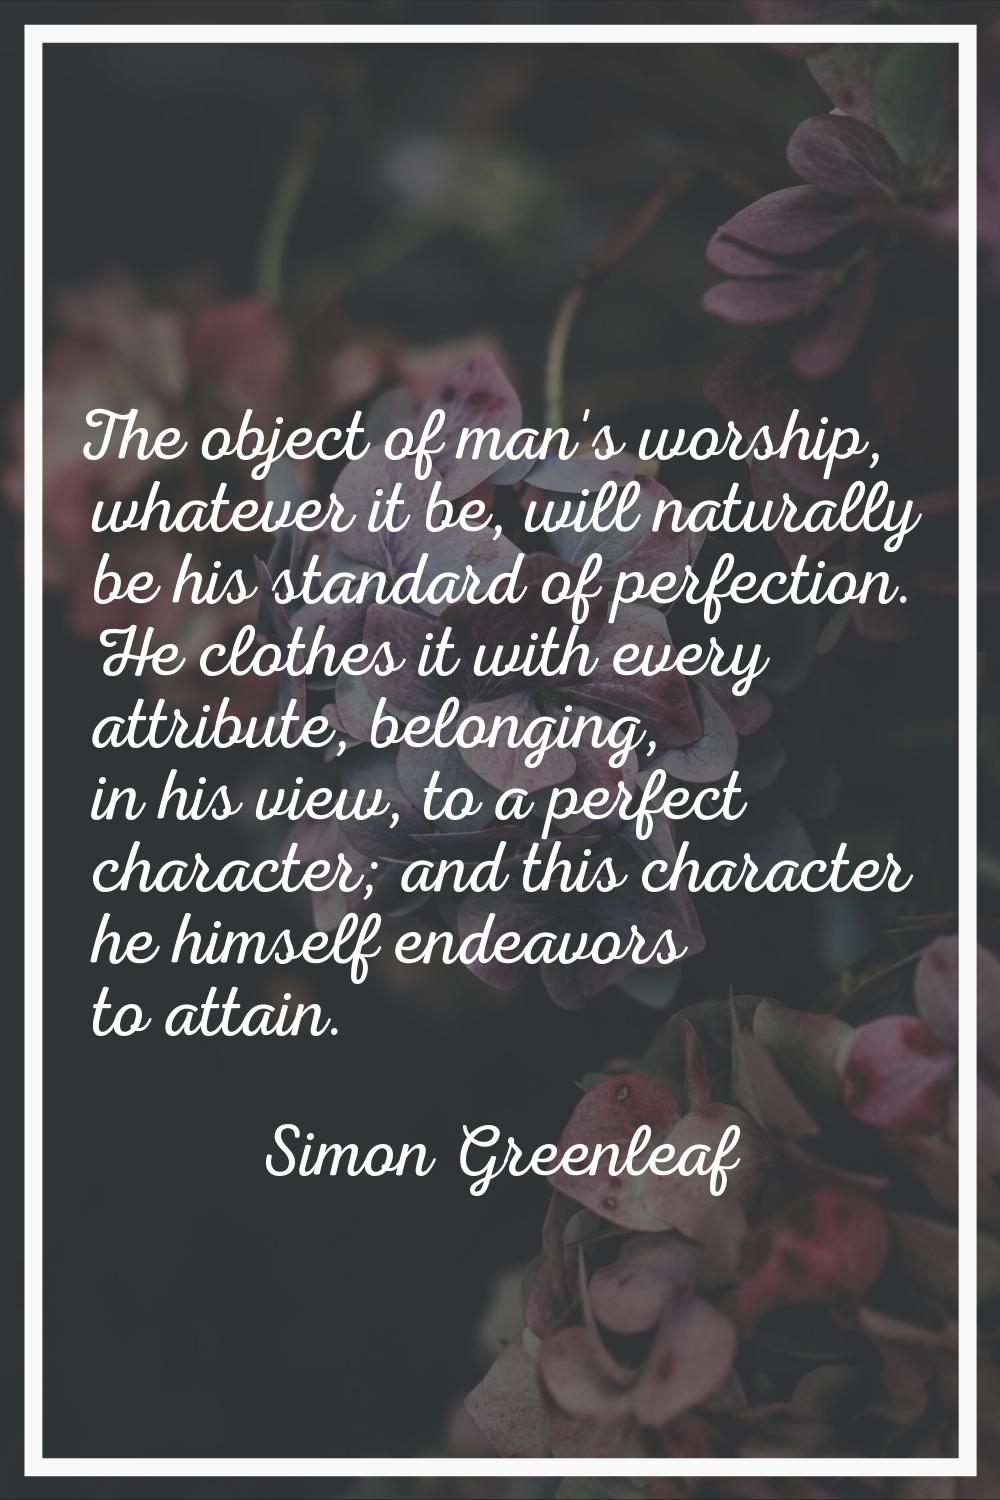 The object of man's worship, whatever it be, will naturally be his standard of perfection. He cloth